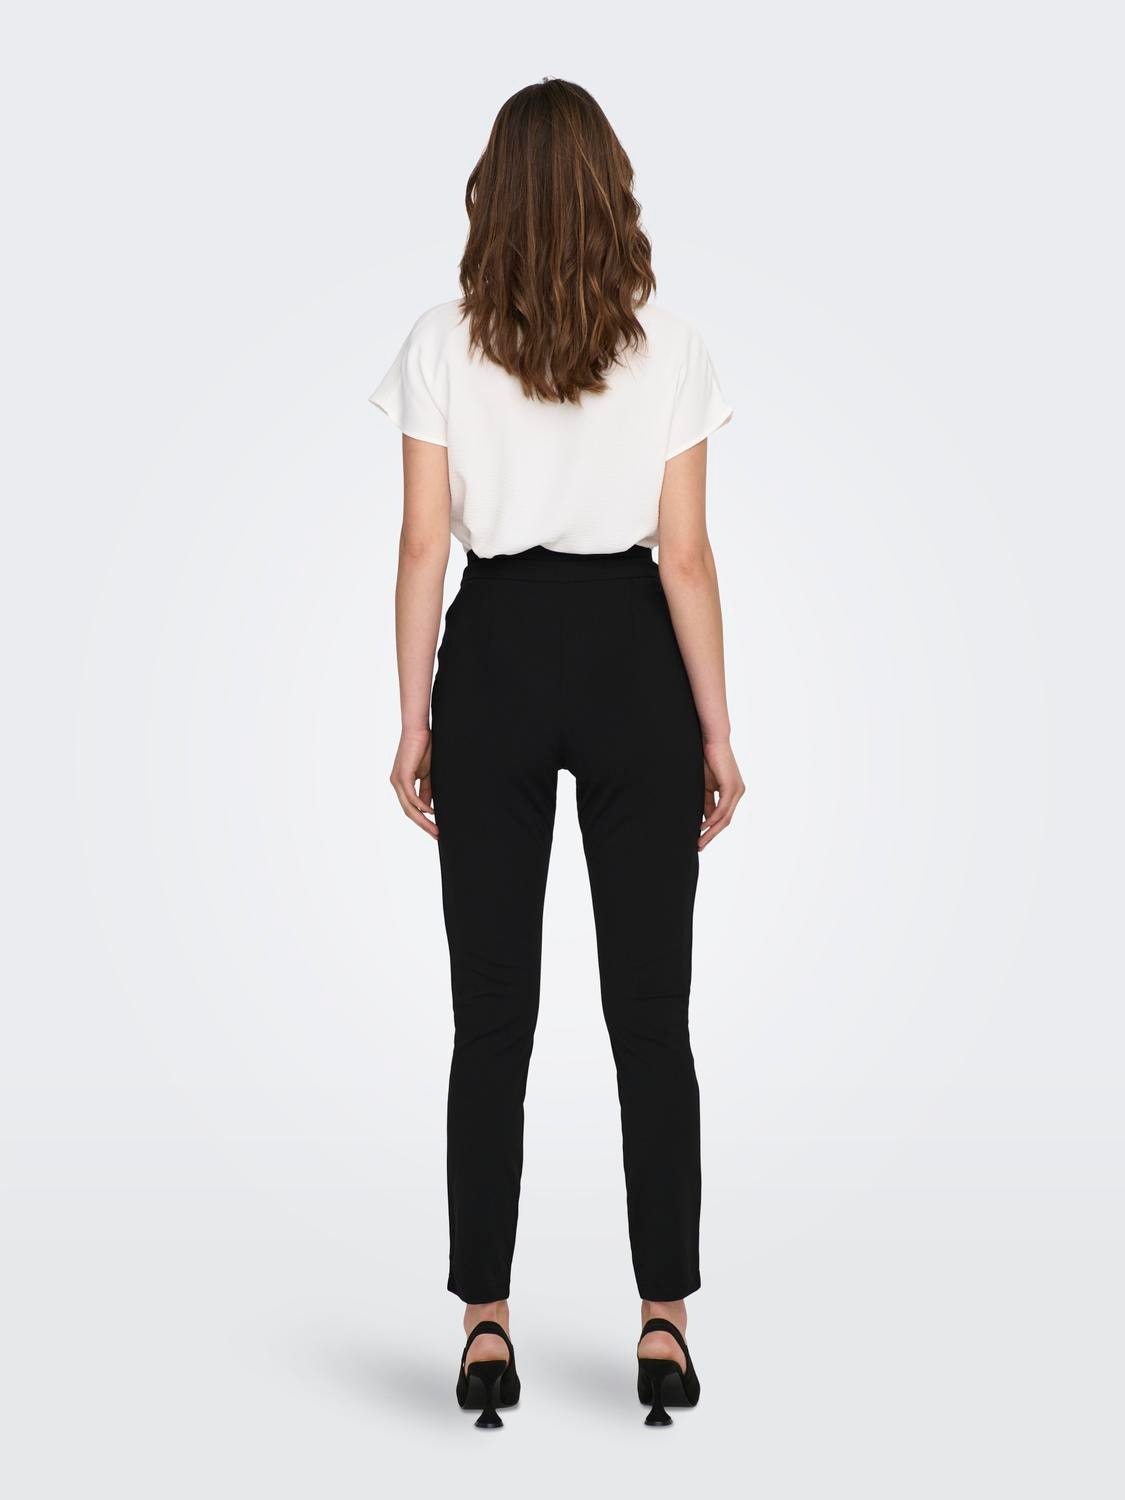 ONLY Regular Fit Trousers -Black - 15205820